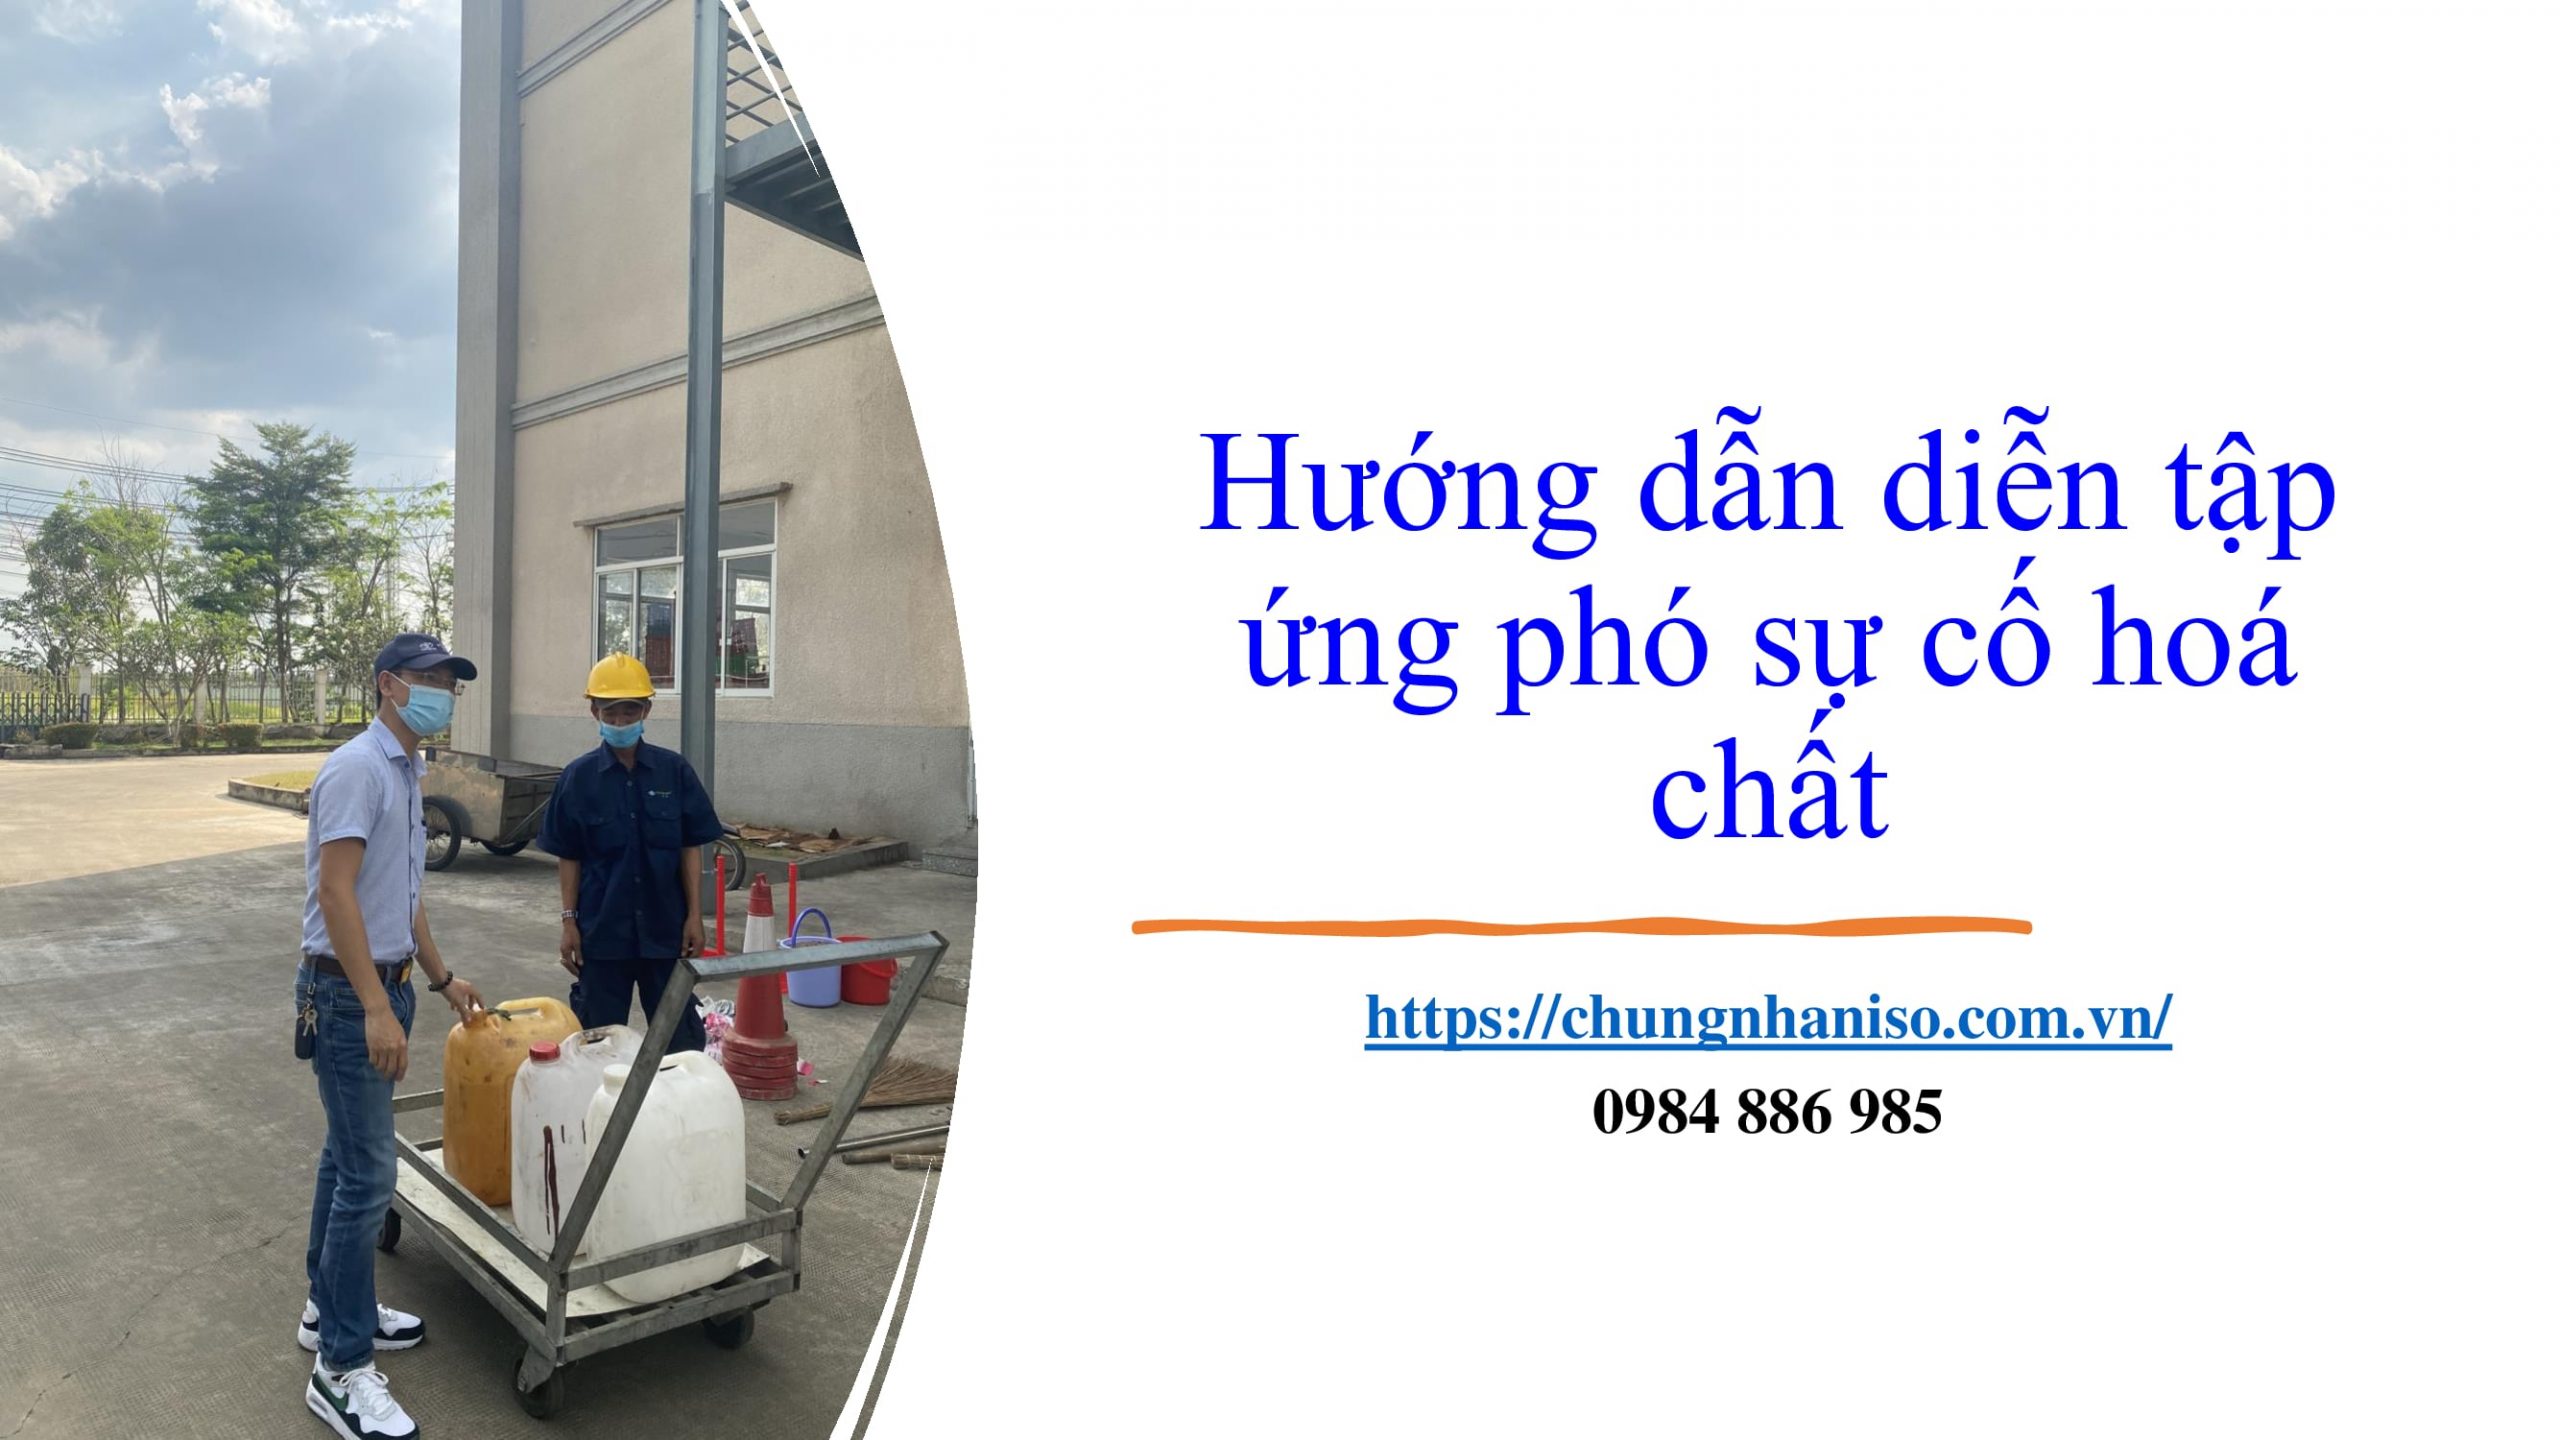 Huong dan dien tap ung pho su co hoa chat scaled